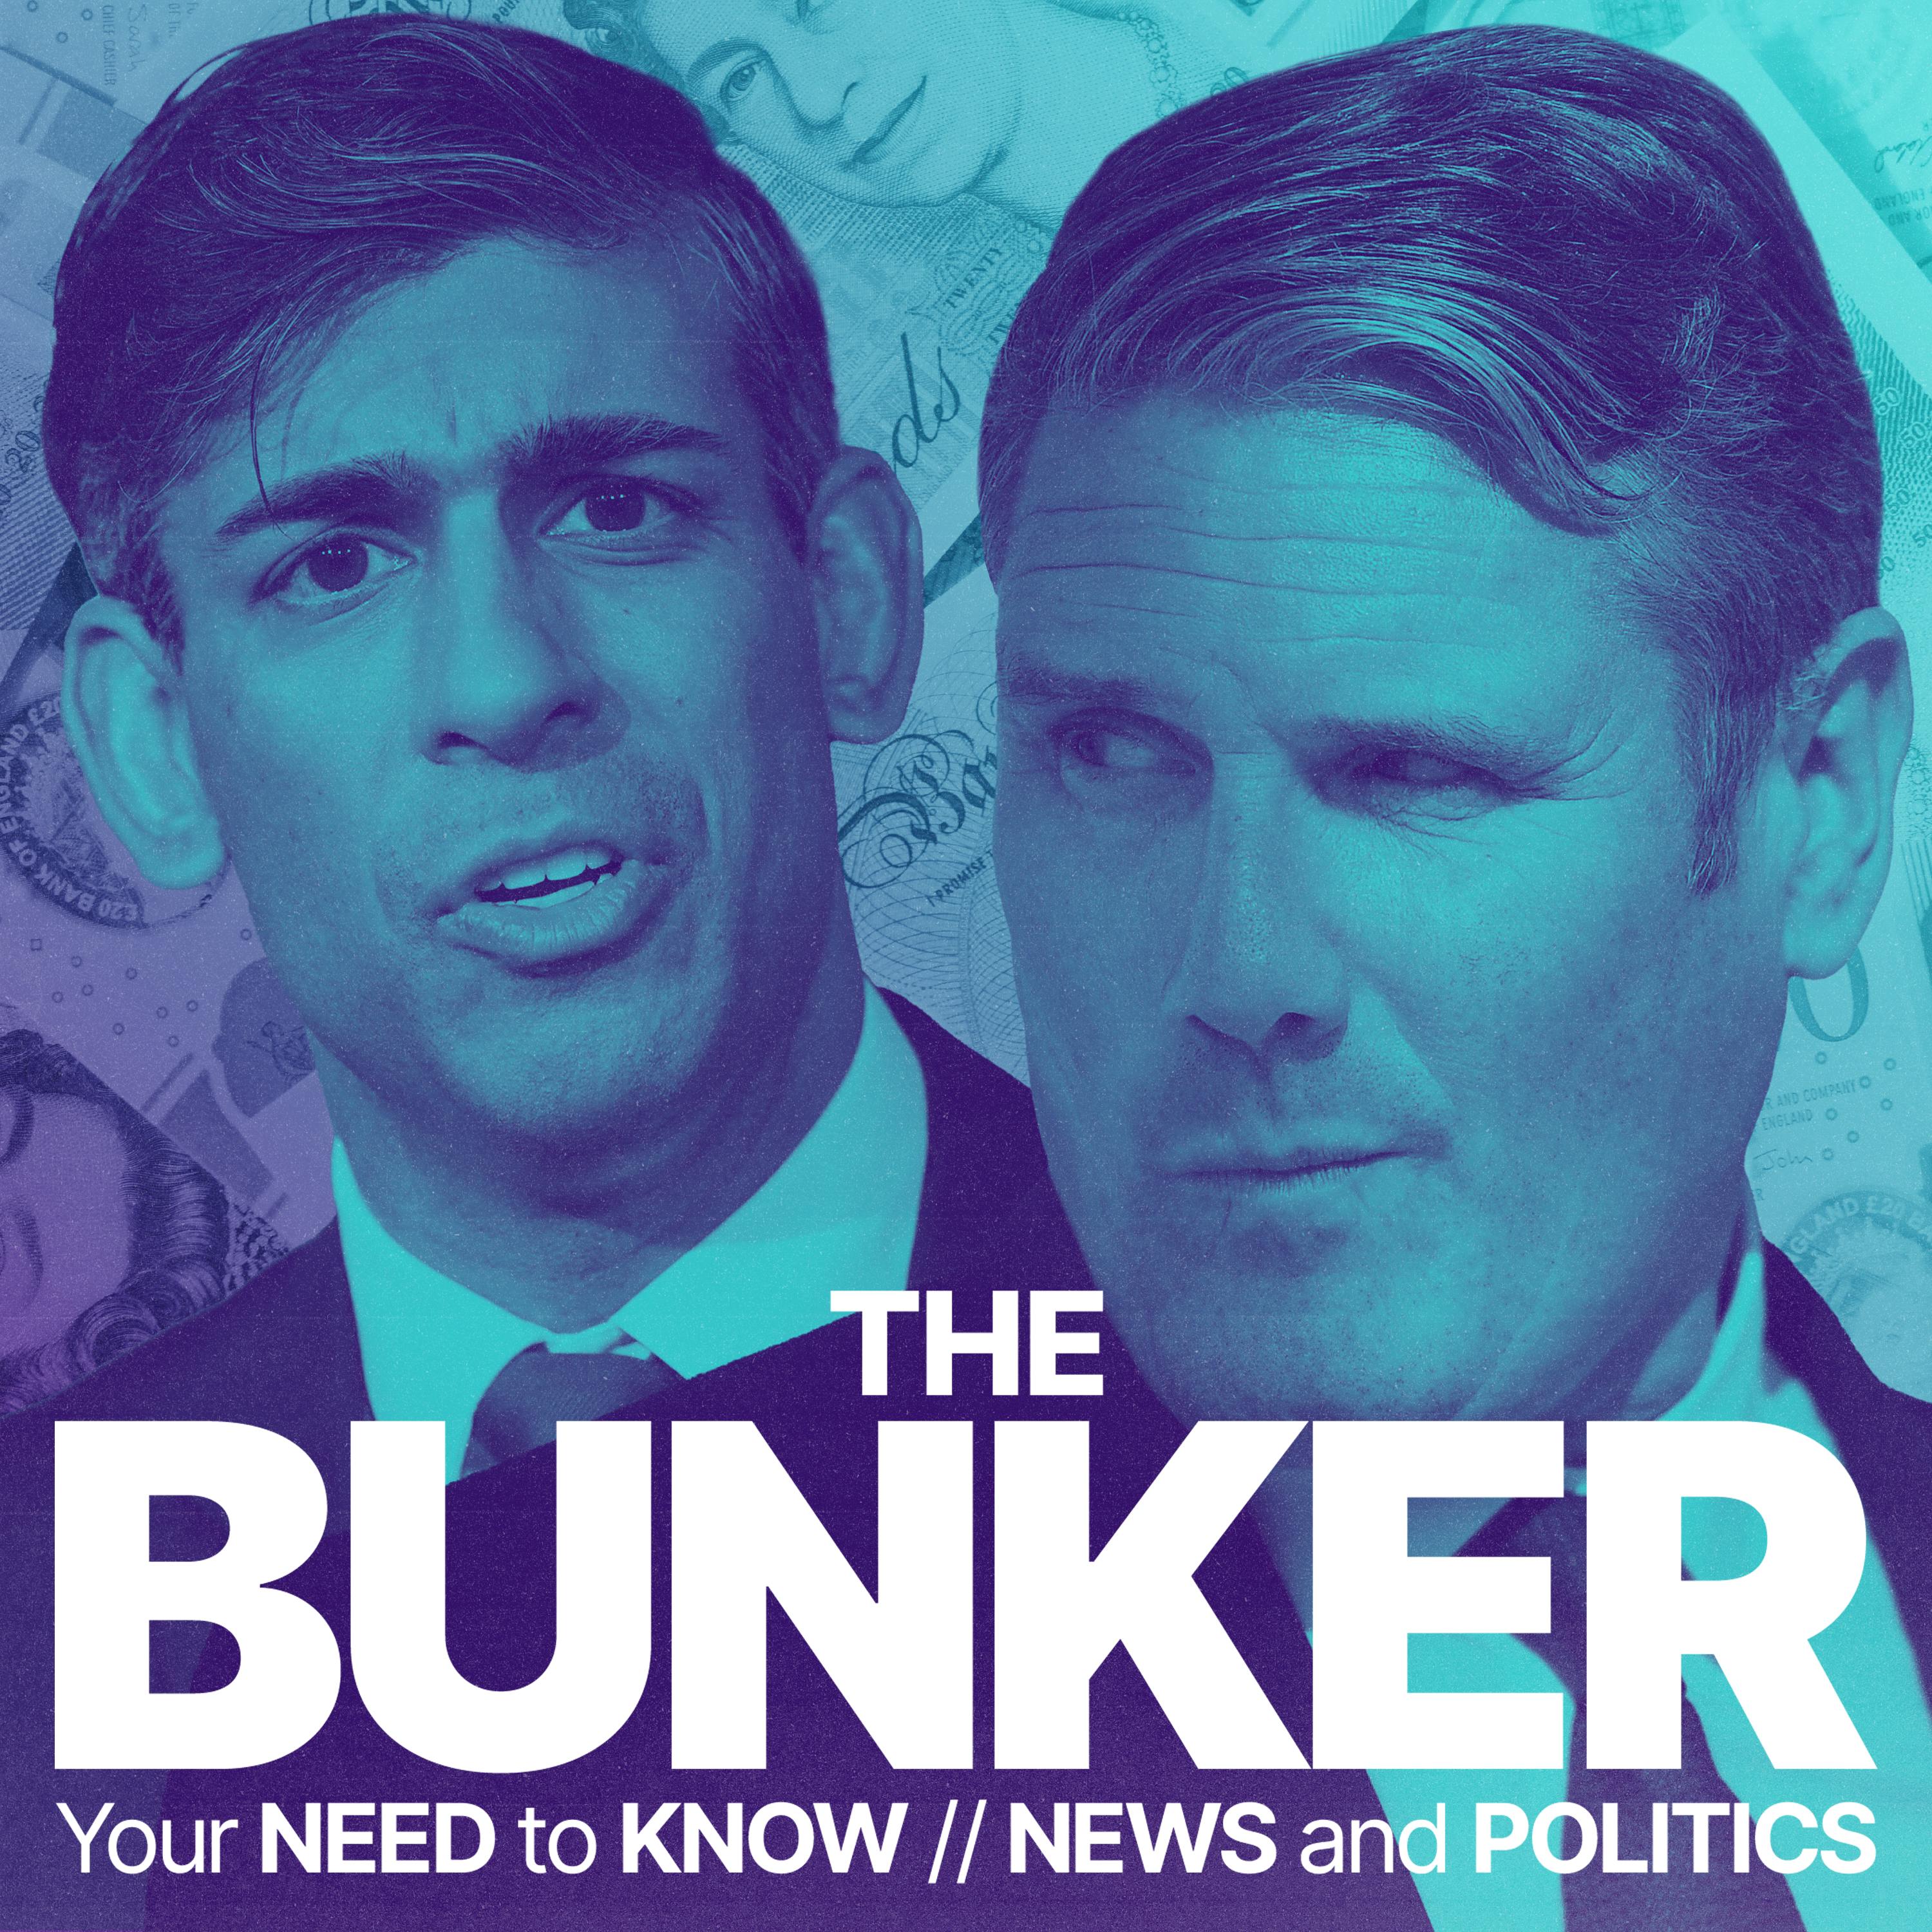 Election '24: How will Sunak and Starmer spend their campaign cash?